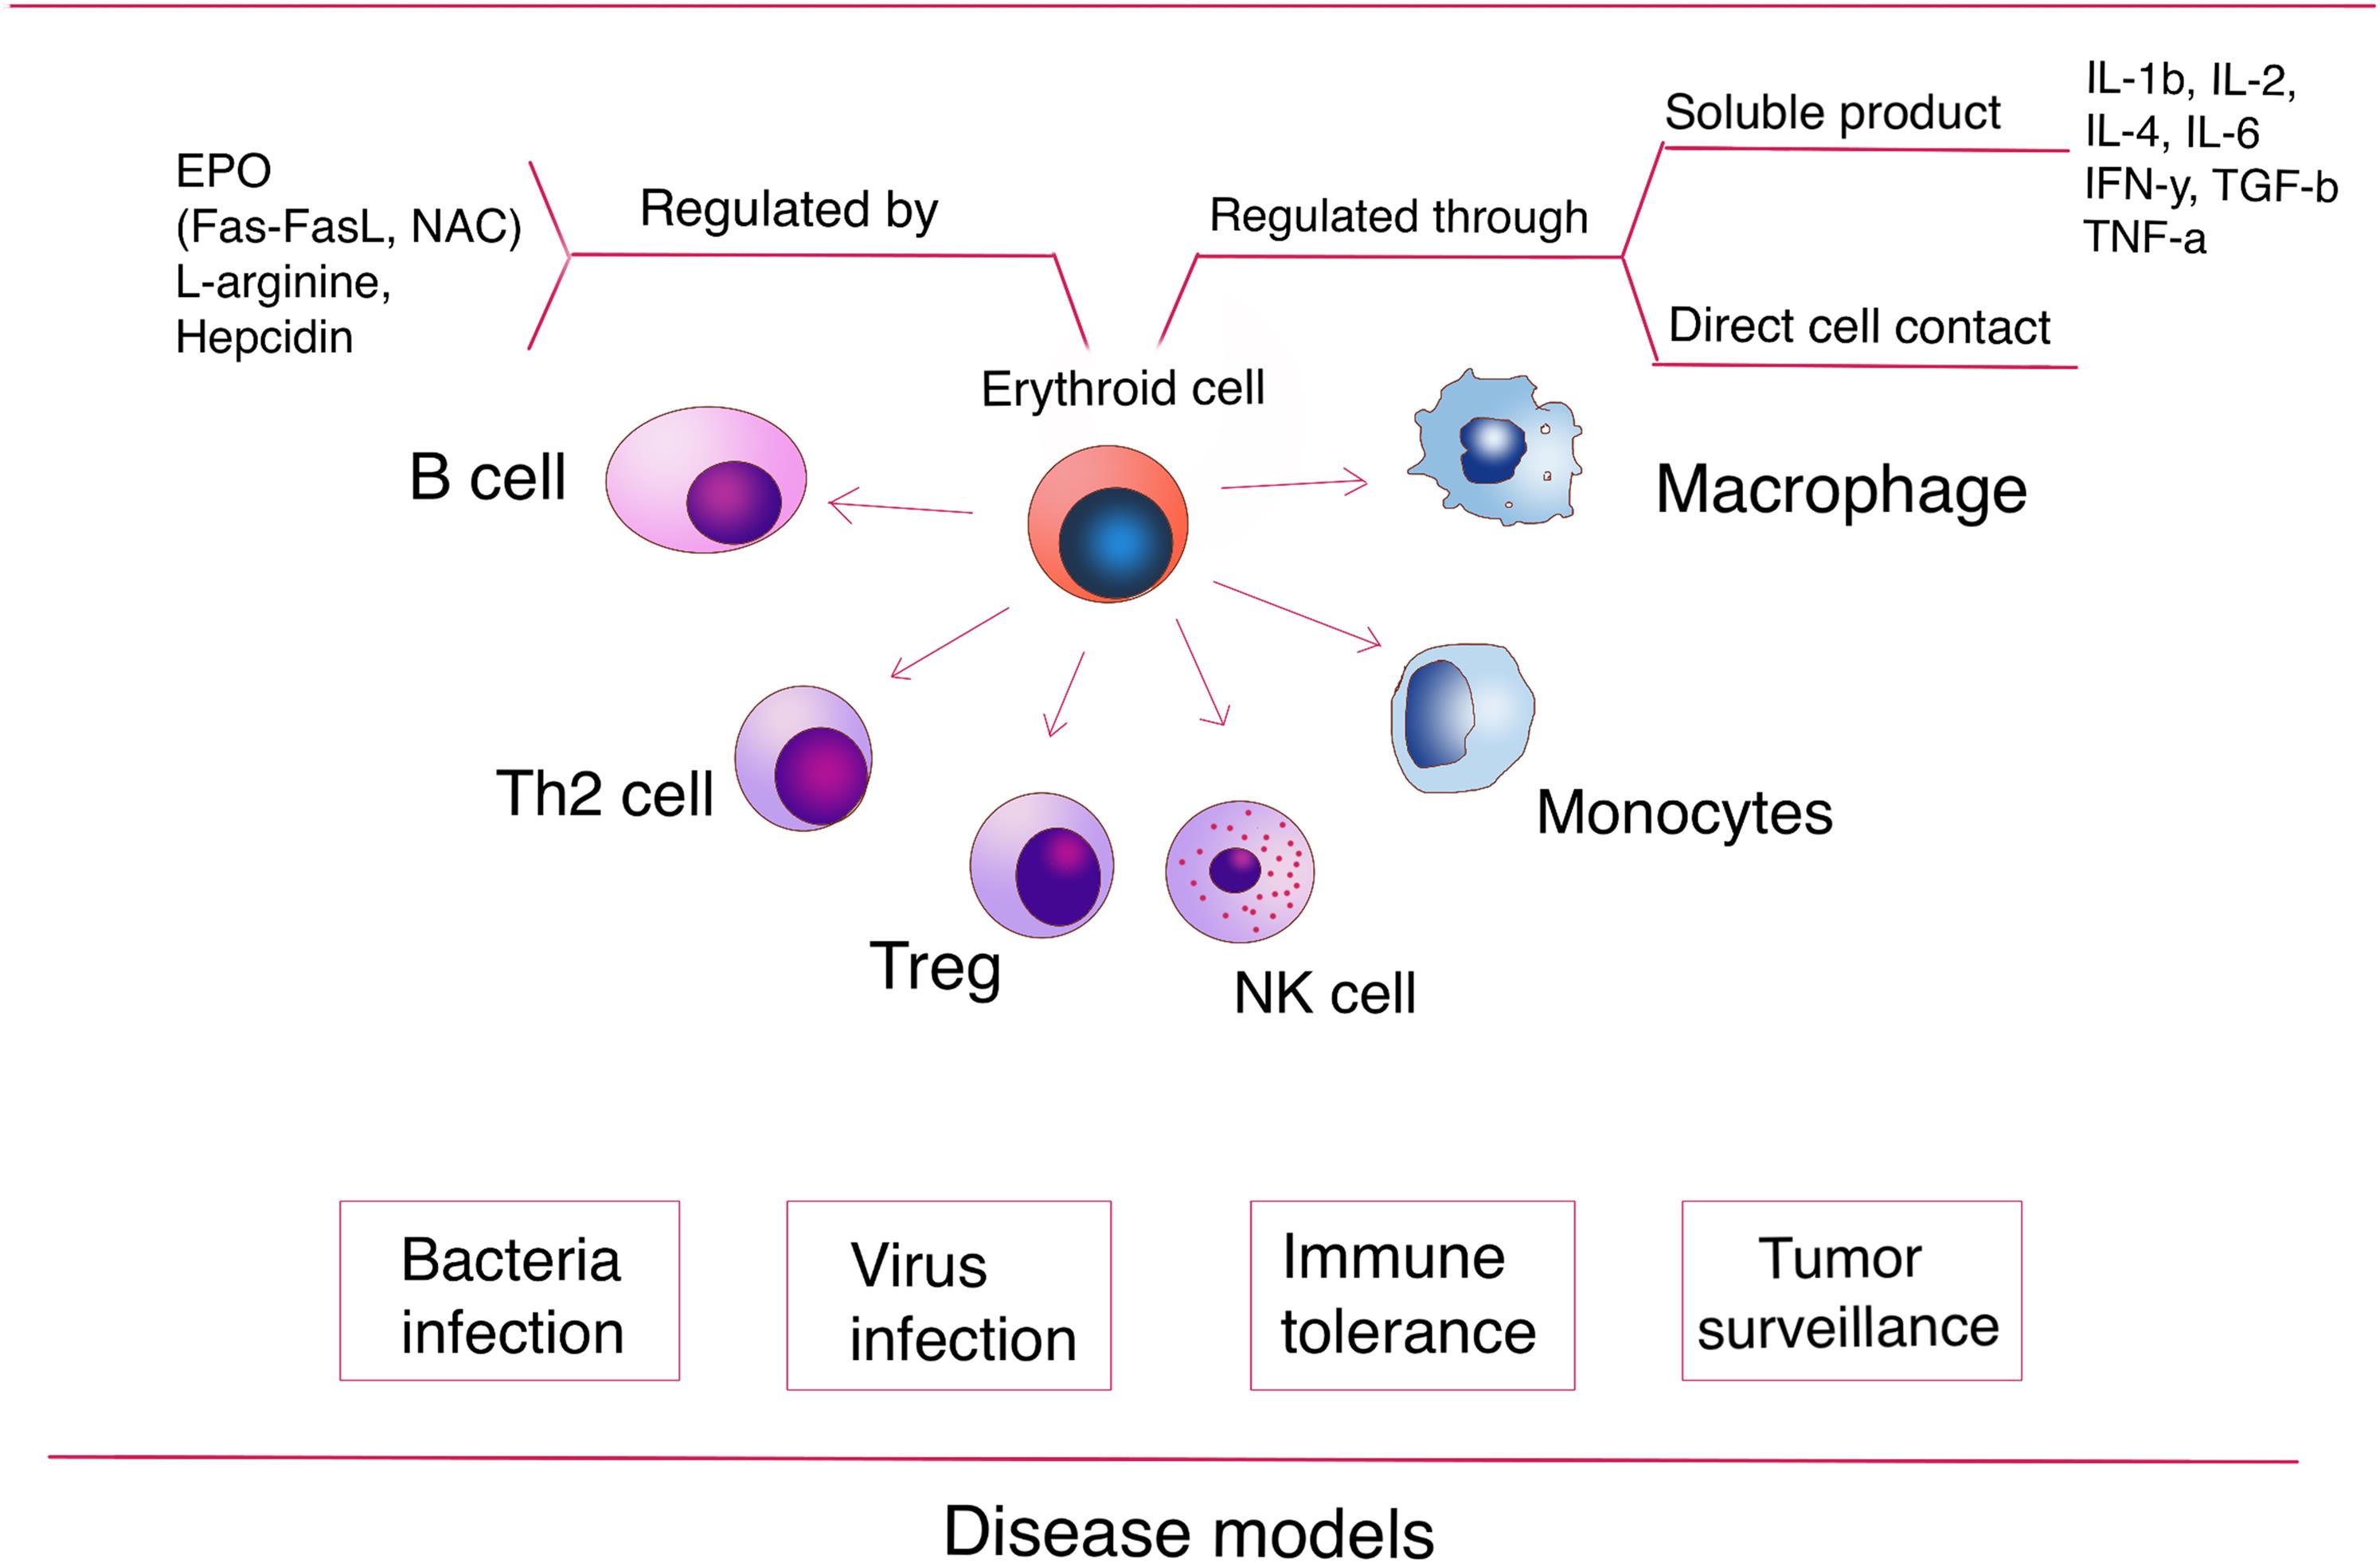 <bold>Mechanism of immune regulation of erythroid cells.</bold> Erythroid cells can regulate on different cell types including both lymphoid cells (B cell, Th2 cell, Treg, NK cells and myeloid cells (macrophage, monocyte), through either soluble cytokines, or direct cell contacts. The upper stream regulators of erythroid cell include EPO (through Fas-FasL and NAC), L-arginine and Hepcidin. The immune regulatory roles of erythroid cells have been evidenced across disease models, including bacteria and virus infection, as well as immune tolerance and tumor surveillance.